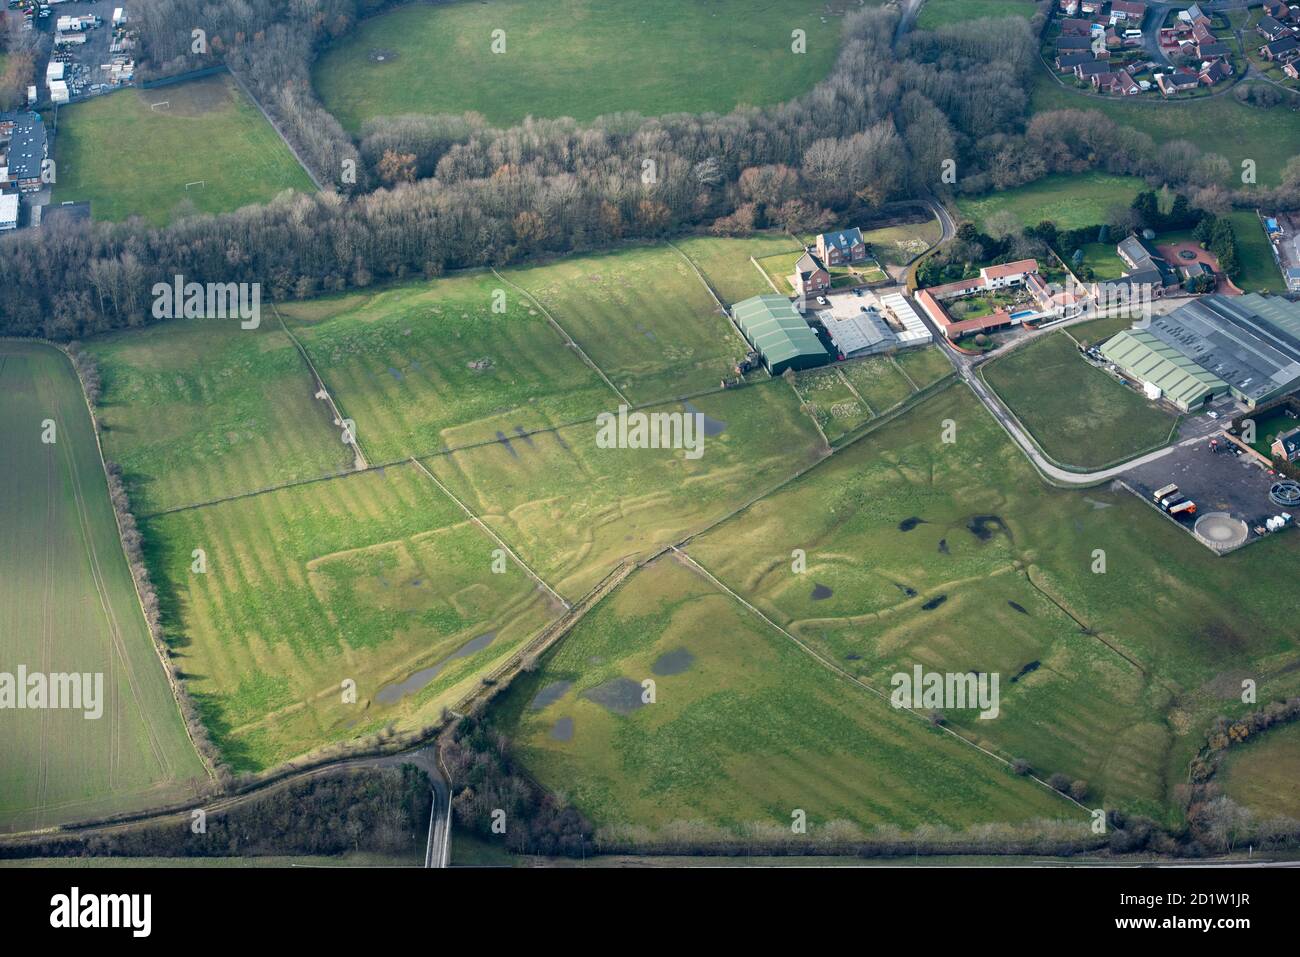 Stainsby medieval village and open field system, Middlesborough and Stockton-on-Tees, UK. Aerial view. Stock Photo